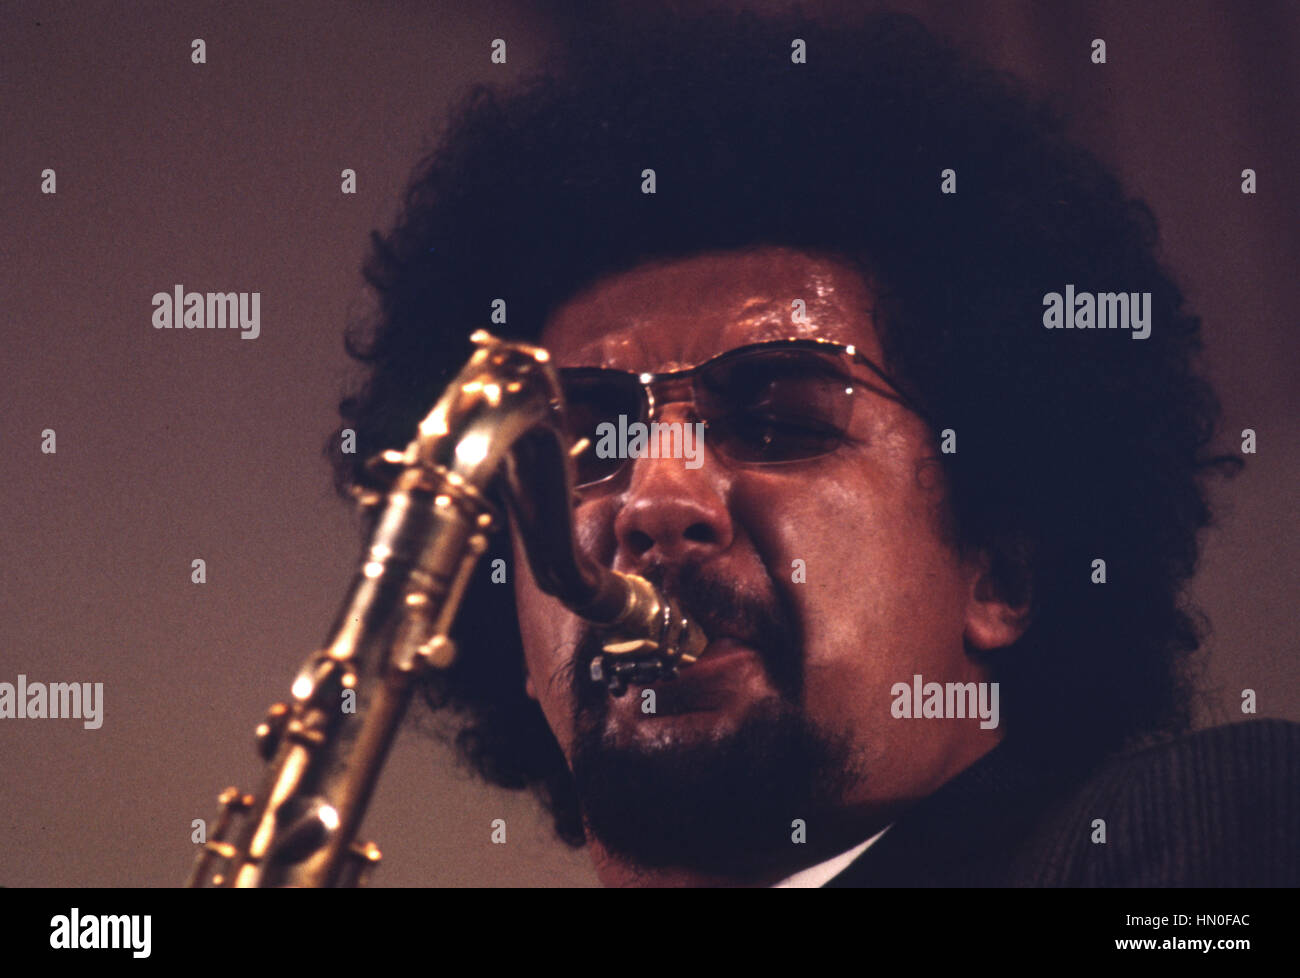 Charles Lloyd performing at the International Jazz Festival at Tallinn, 1967. This performance was recorded live, and was released in the album titled Charles Lloyd in the Soviet Union. Lloyd was accompanied by Keith Jarrett, Ron McClure, and Jack DeJohnette. Stock Photo